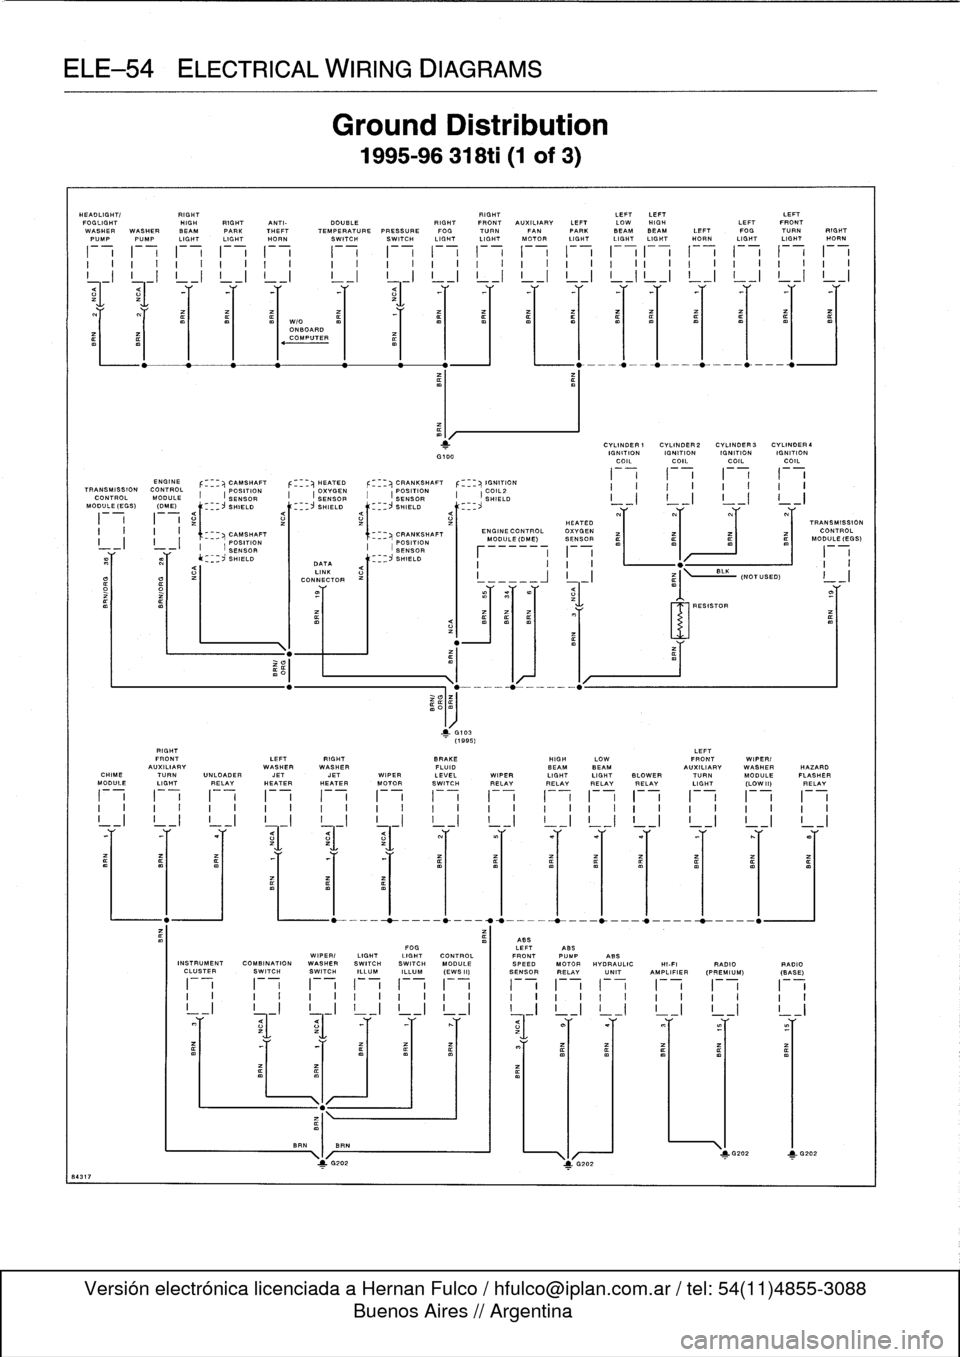 BMW 323i 1998 E36 Owners Guide 
ELE-54
ELECTRICAL
WIRING
DIAGRAMS

HEADLIGHT/

	

RIGHT

	

RIGHT

	

LEFTLEFT

	

LEFT
FOGLIGHT

	

HIGH
RIGHT
ANTI-

	

DOUBLE

	

RIGHT
FRONT
AUXILIARY
LEFT
LOW
HIGH

	

LEFT
FRONT
WASHER
WASHER
B